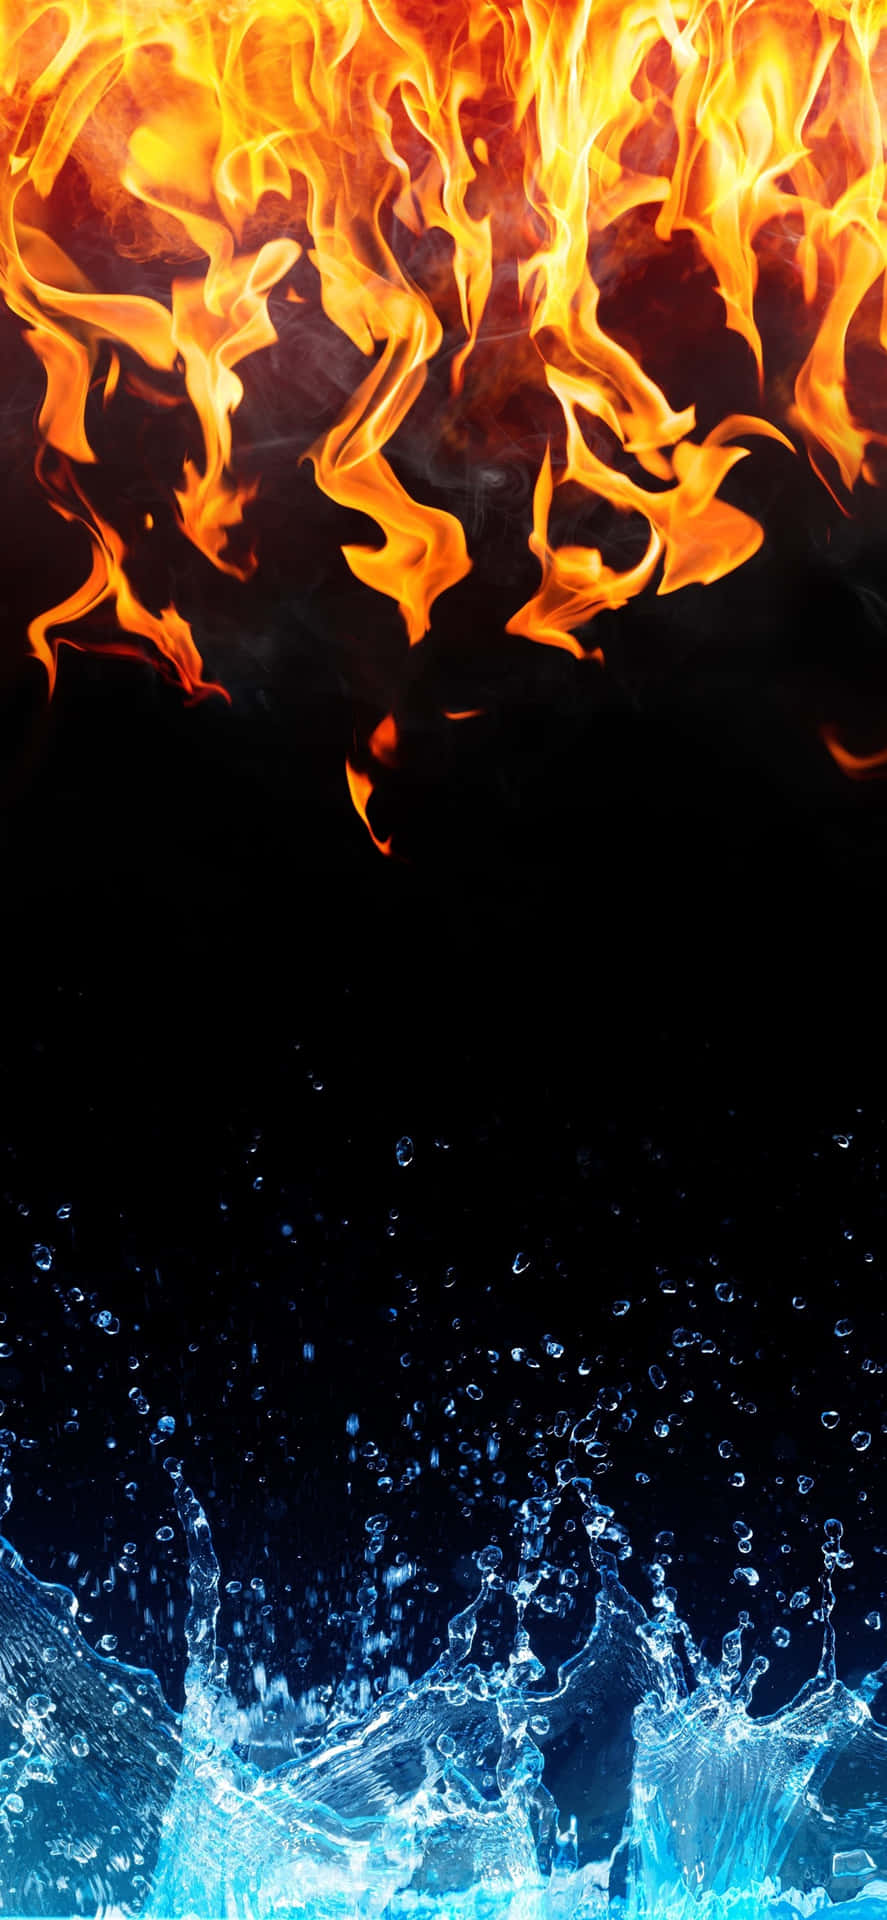 The clash of the elemental forces - fire and water Wallpaper